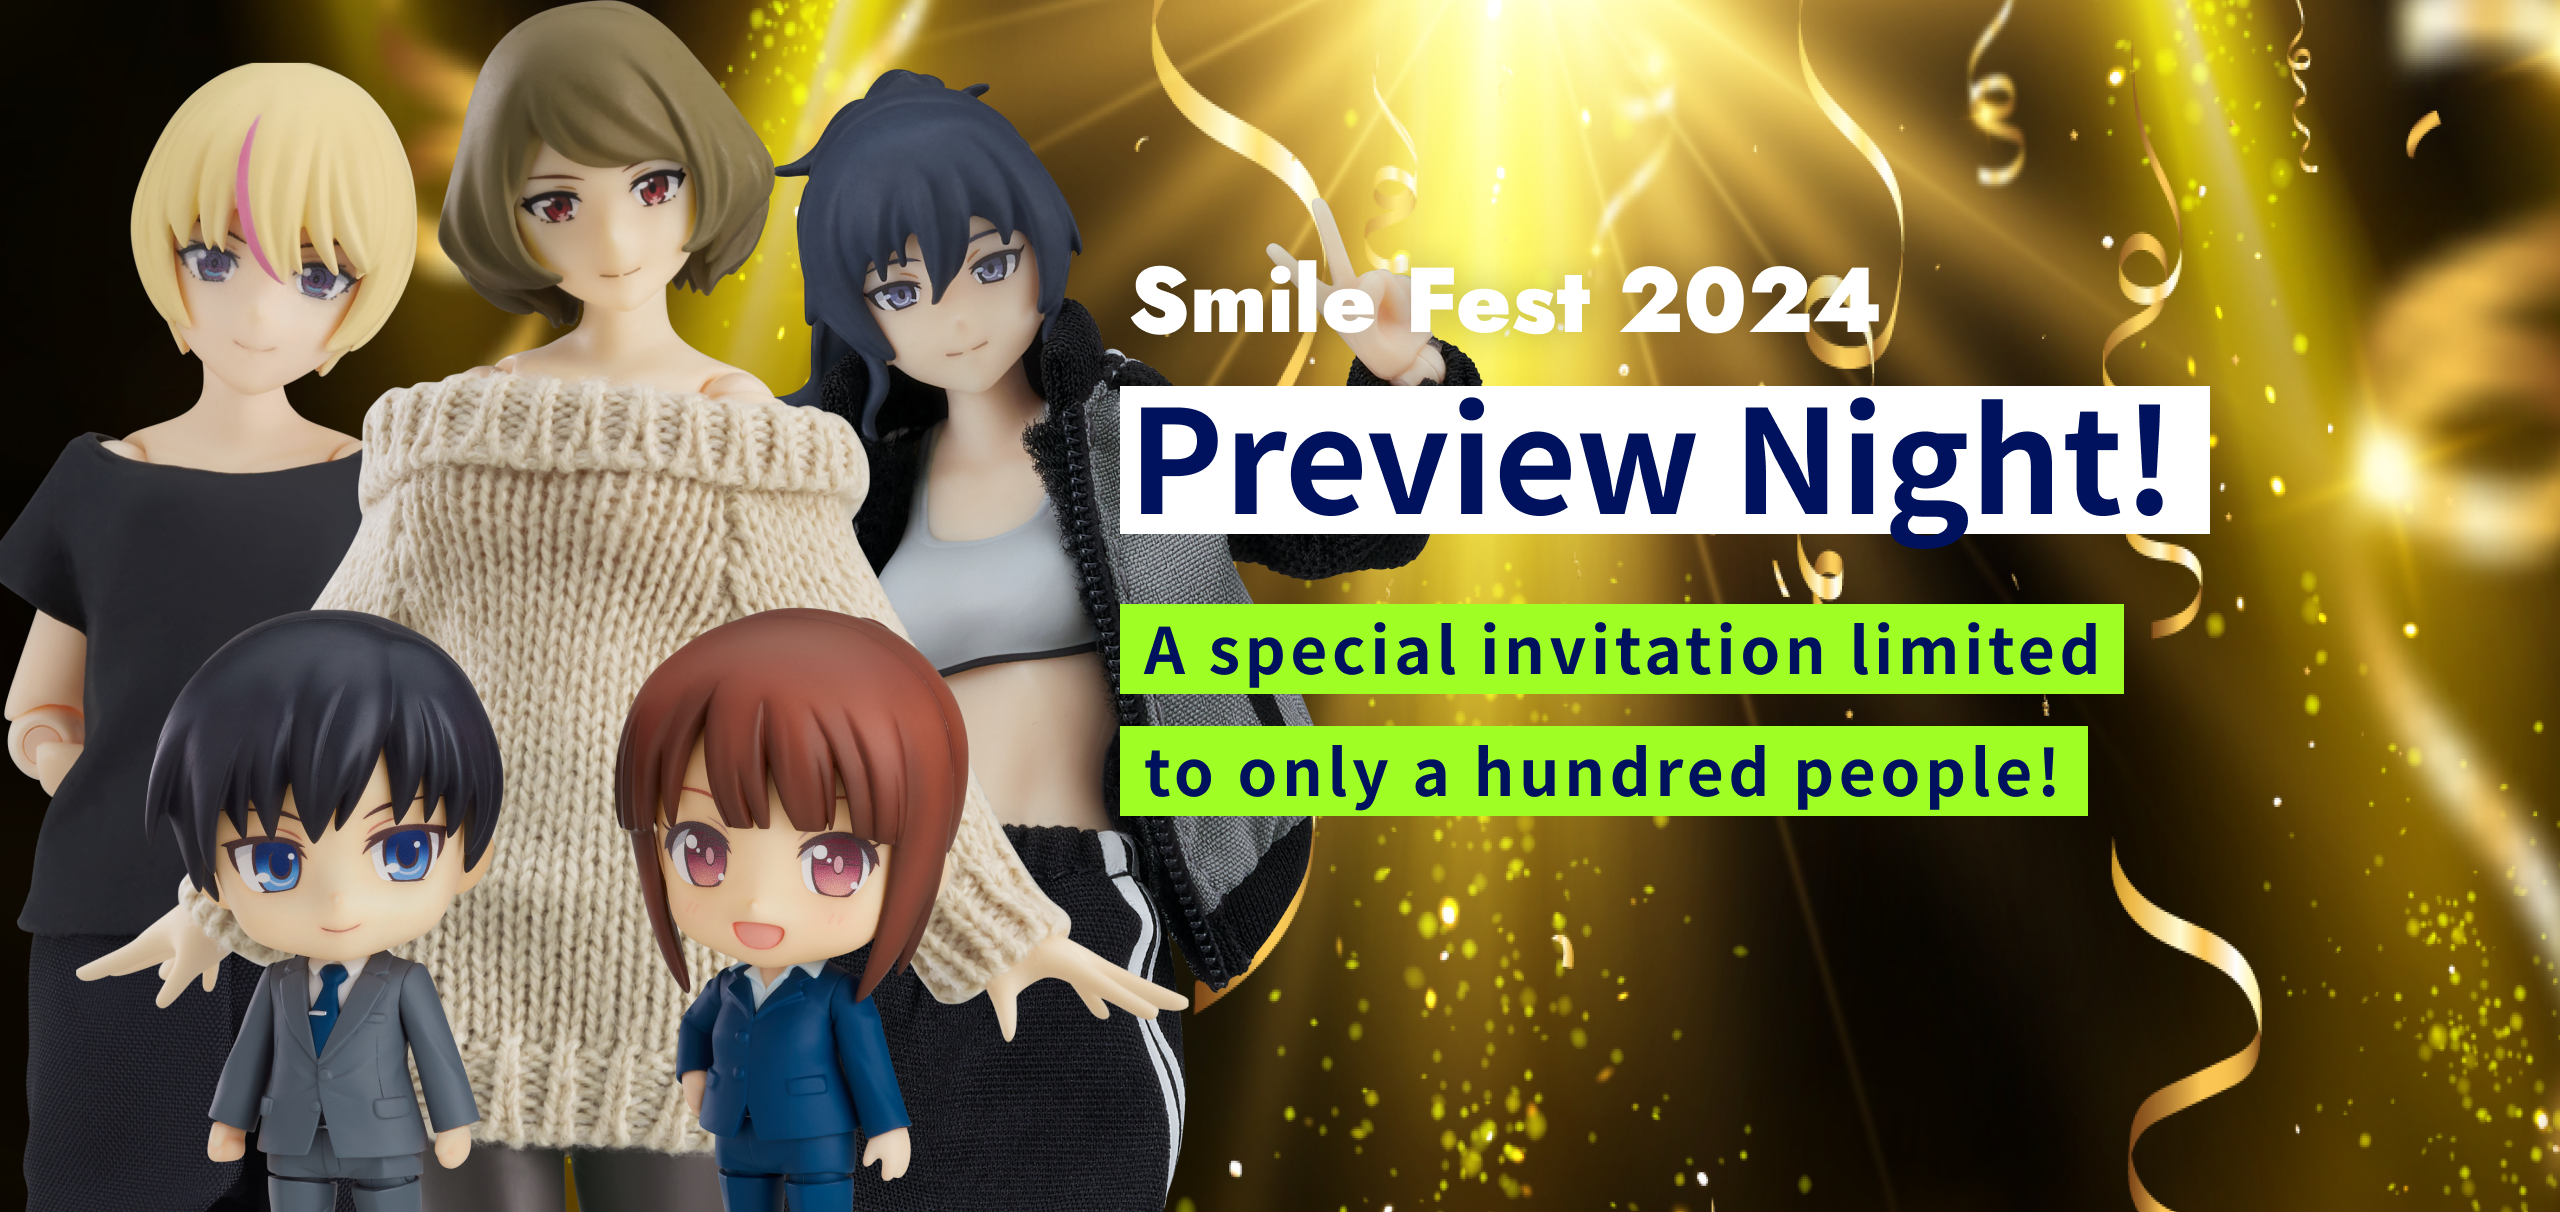 Smile fest 2024 Preview Night! A special invitation limited to only a hundred people!